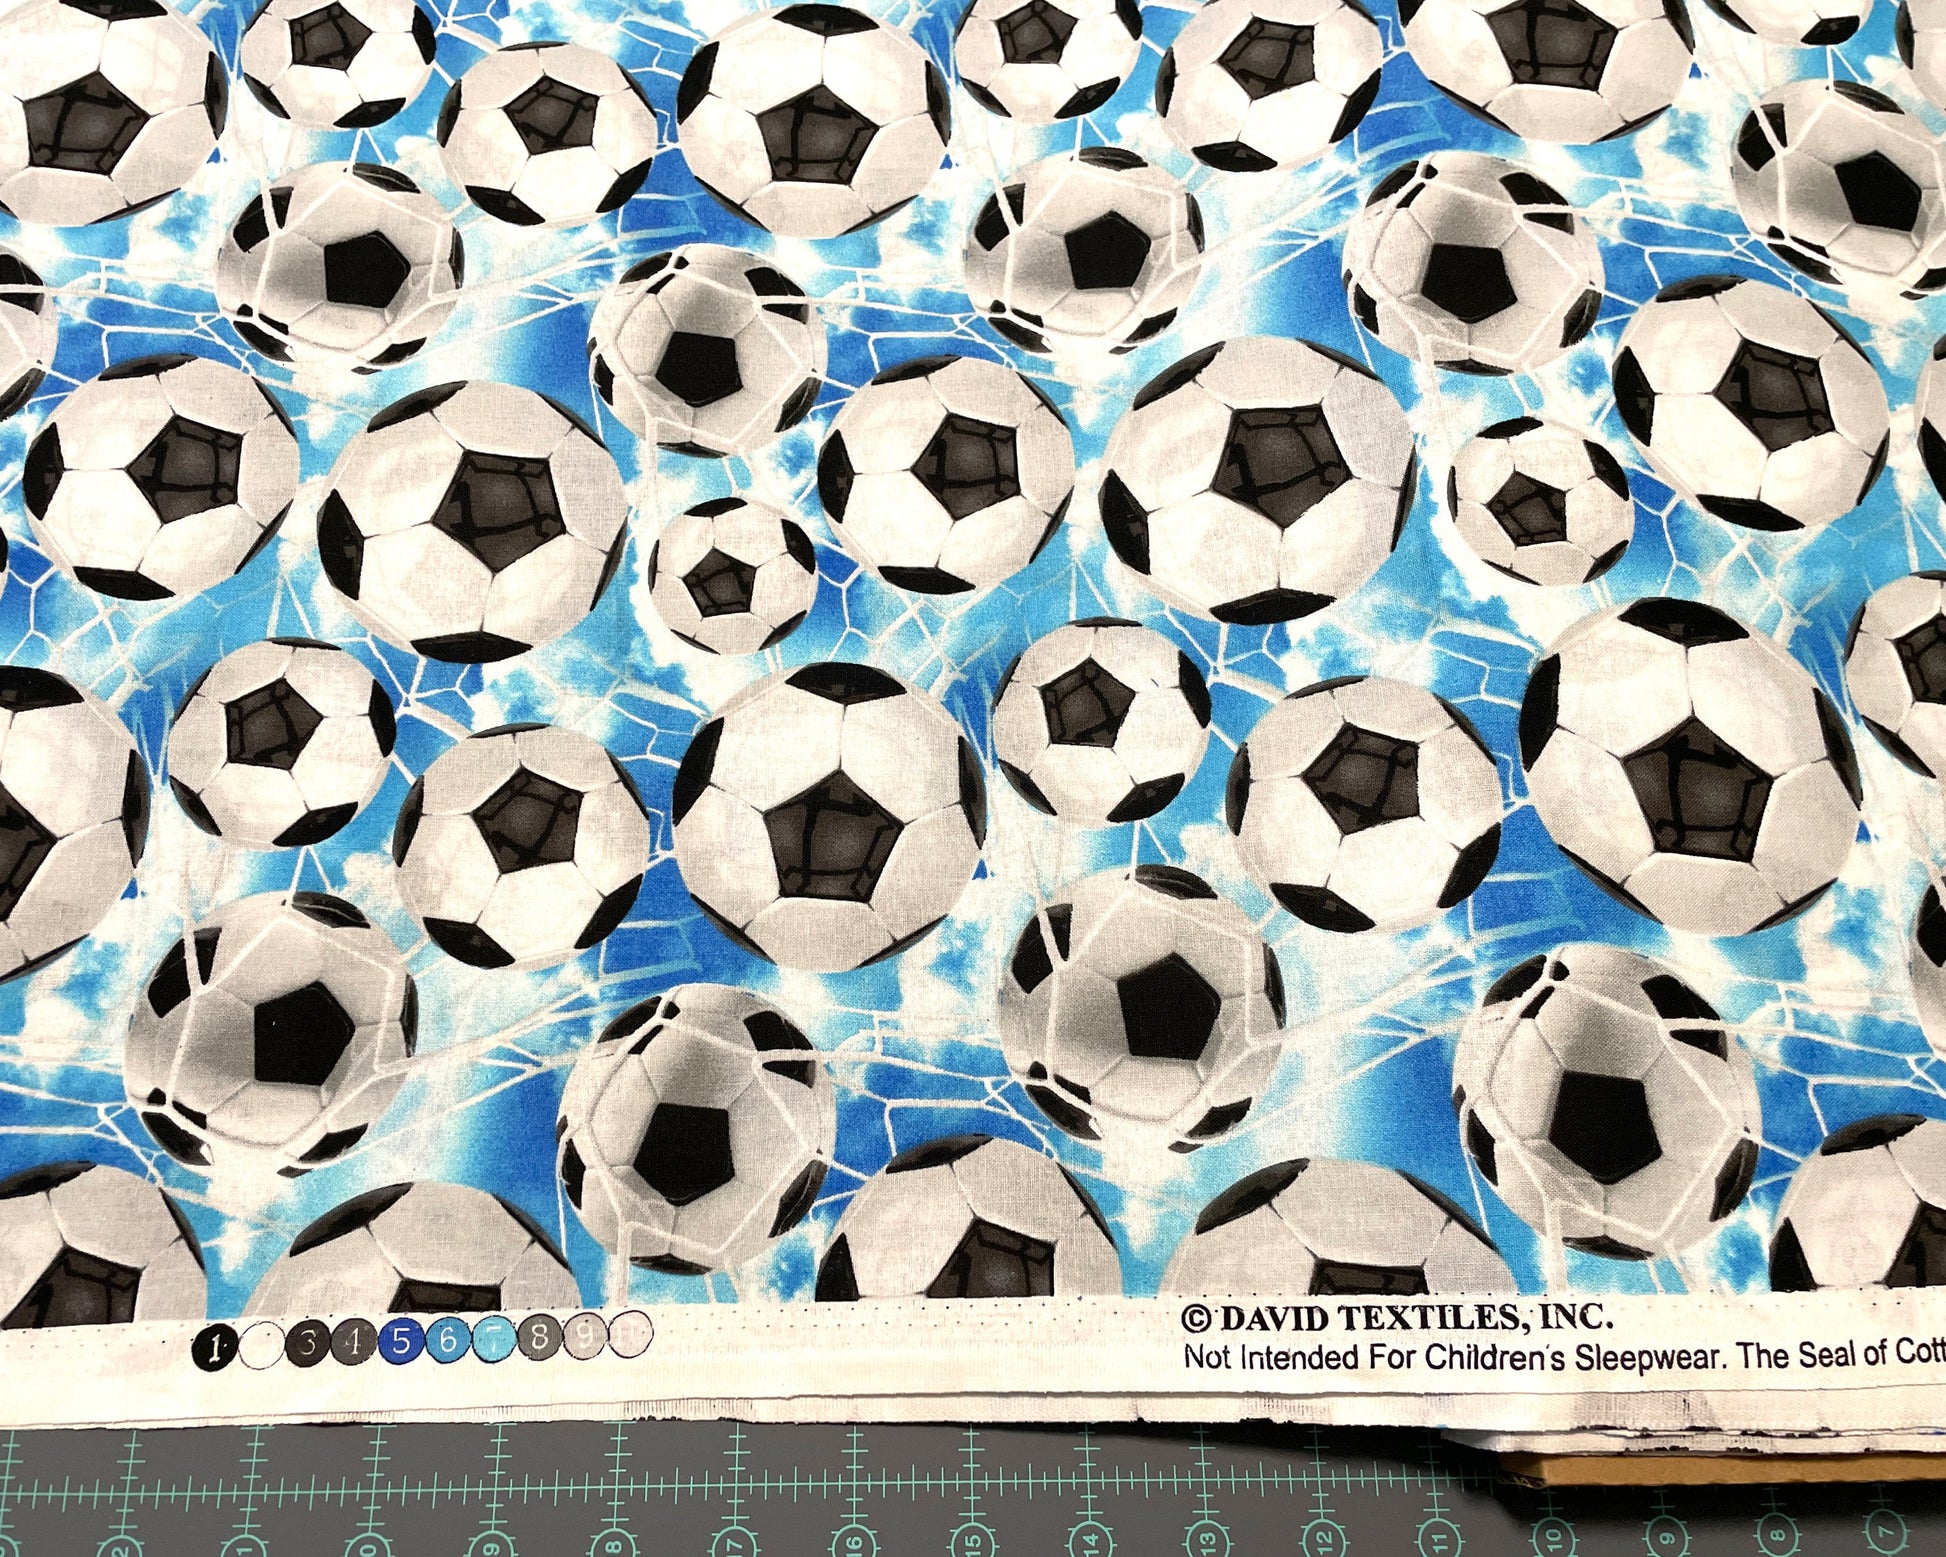 Soccer Fabric - 100% Cotton - Quilting Cotton - Blue Soccer Sky with Net - Sports Fabric - Black and White Soccer ball - Ships NEXT DAY